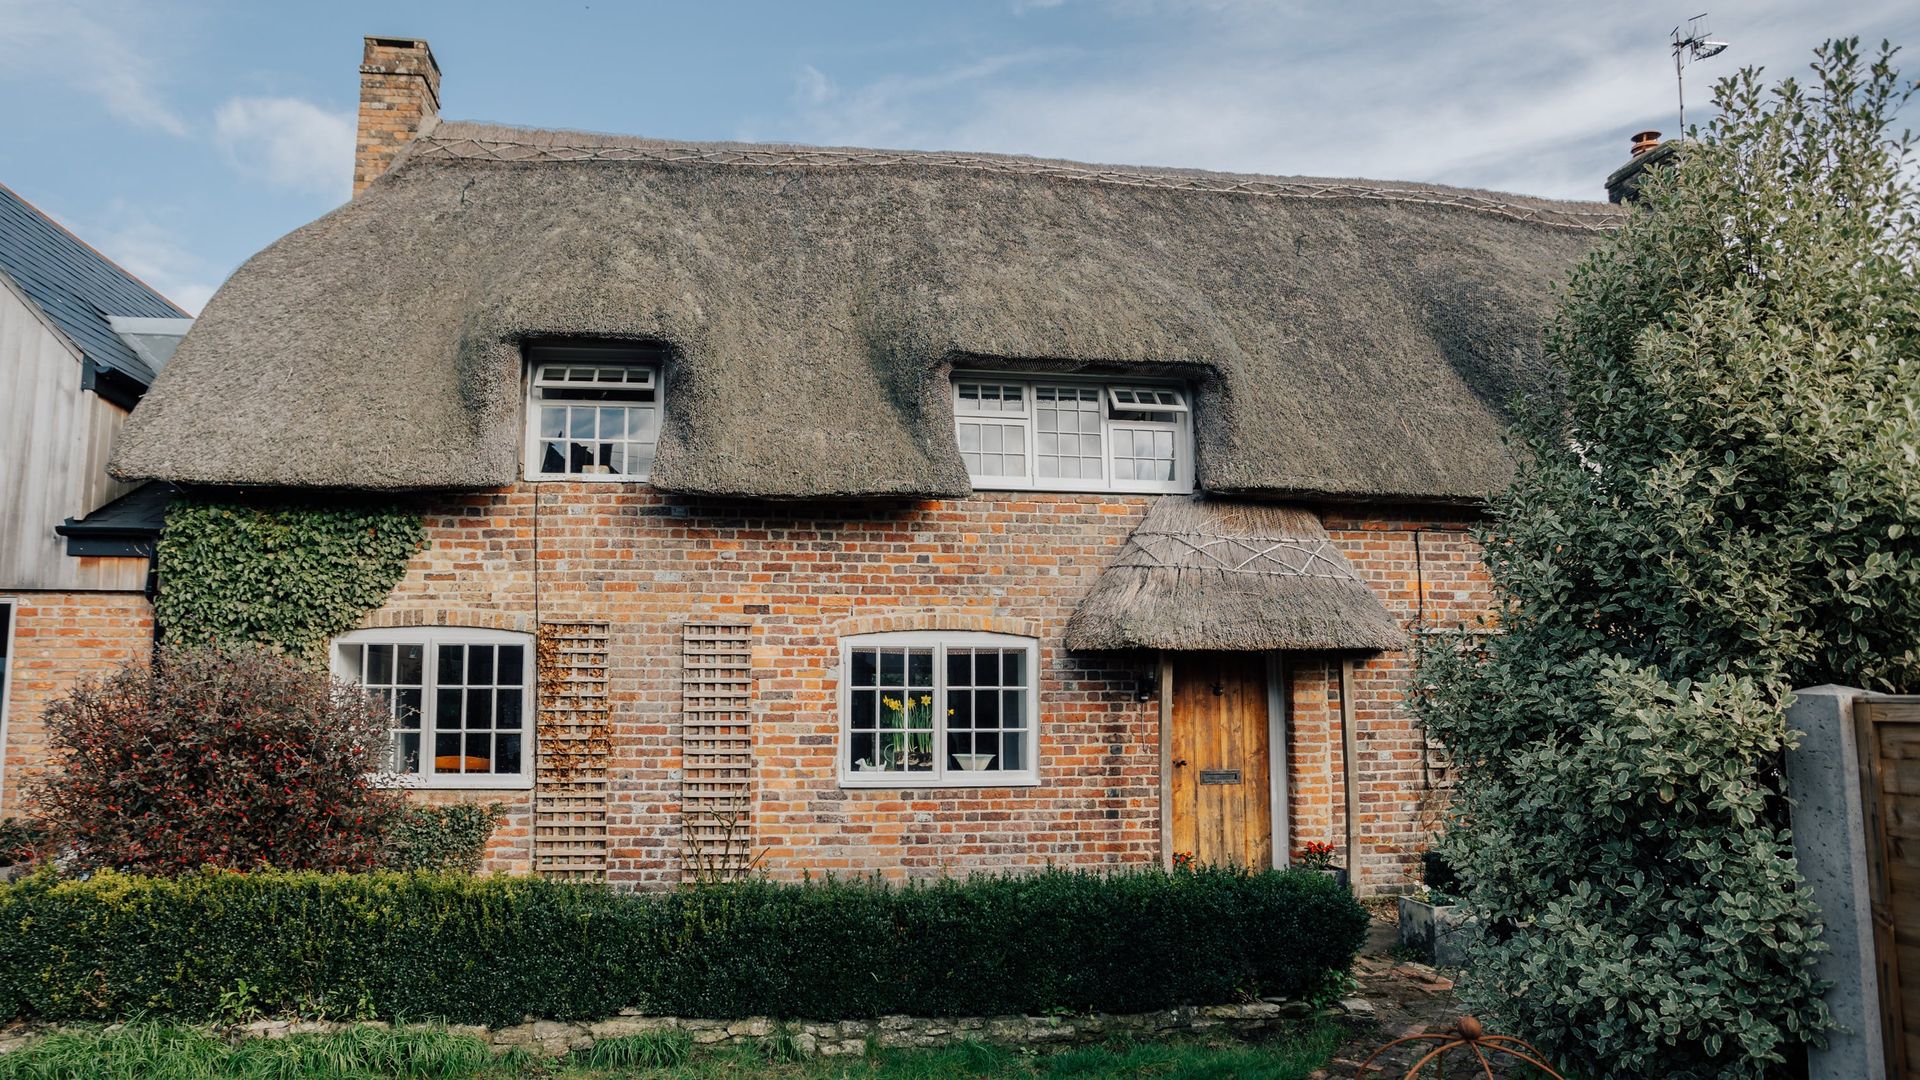 Thatched Roof Romance photo 1